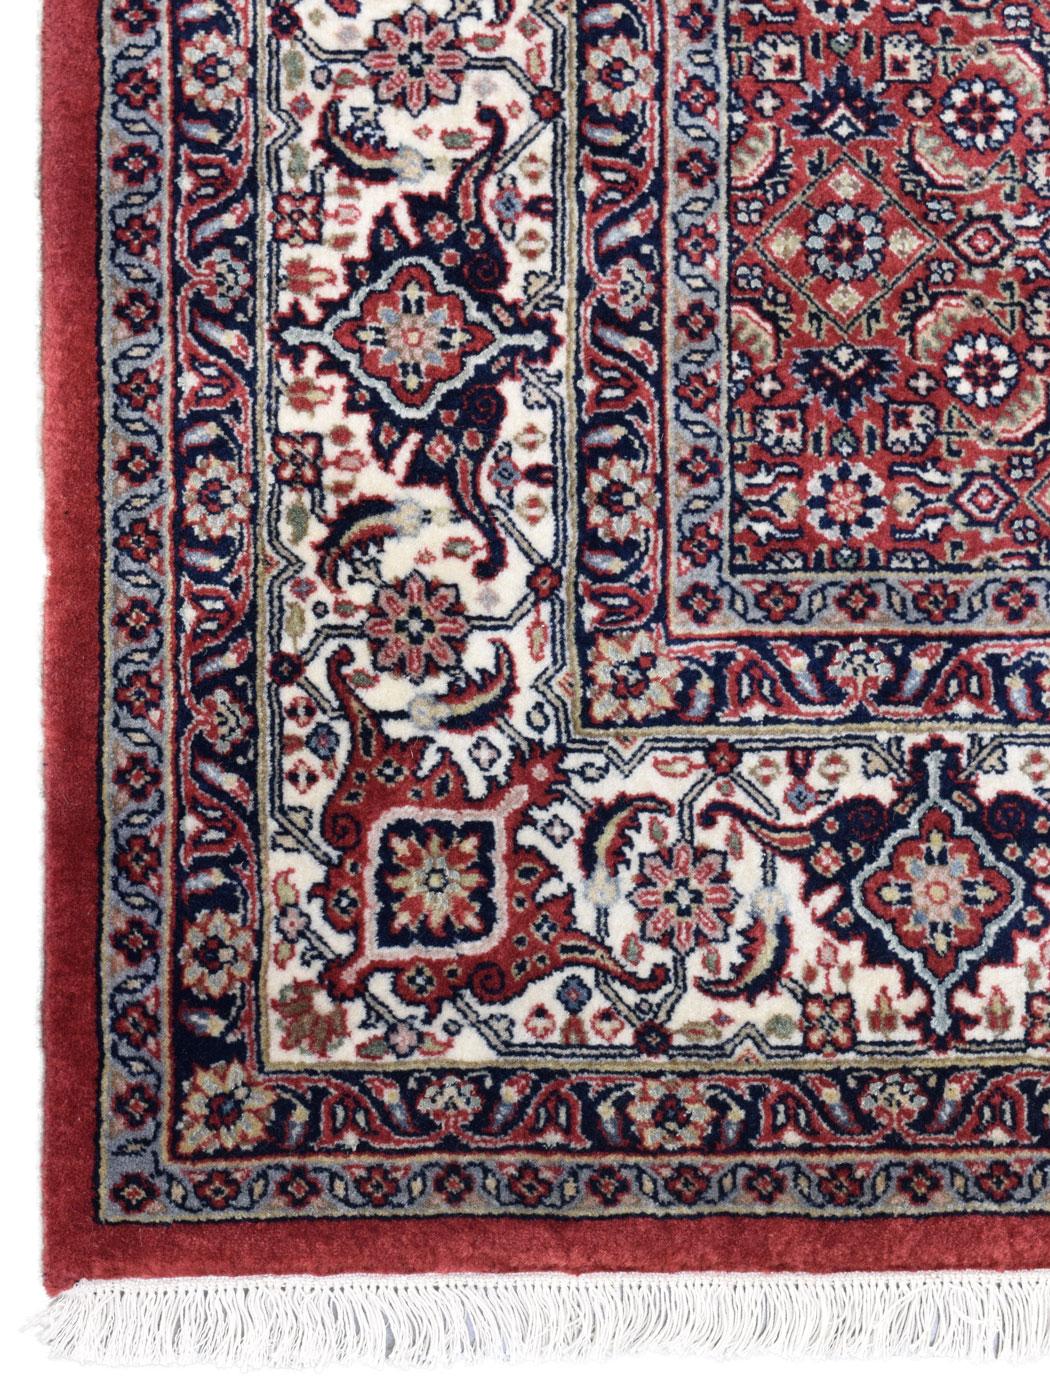 Indian Classic Hand-Knotted Bidjar Carpet in Red, Indigo, and Cream Wool, 5' x 7' For Sale